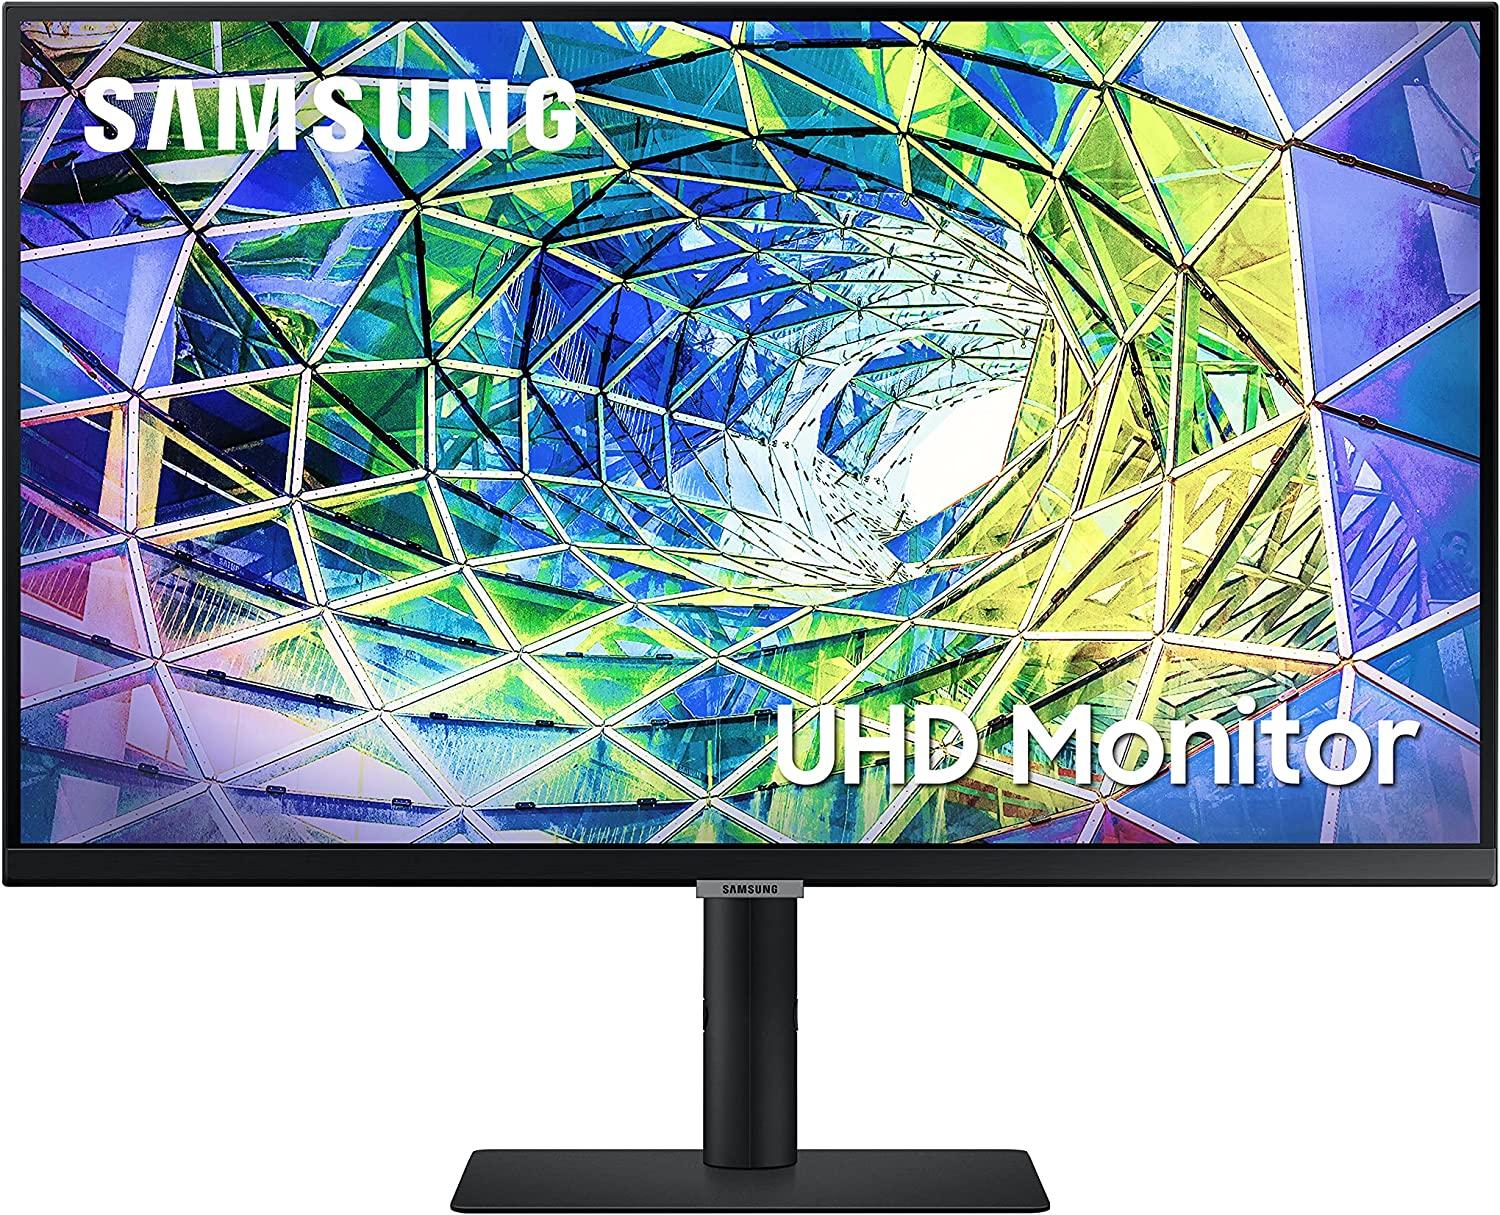 27in Samsung 4K UHD HDR Monitor for $199.99 Shipped